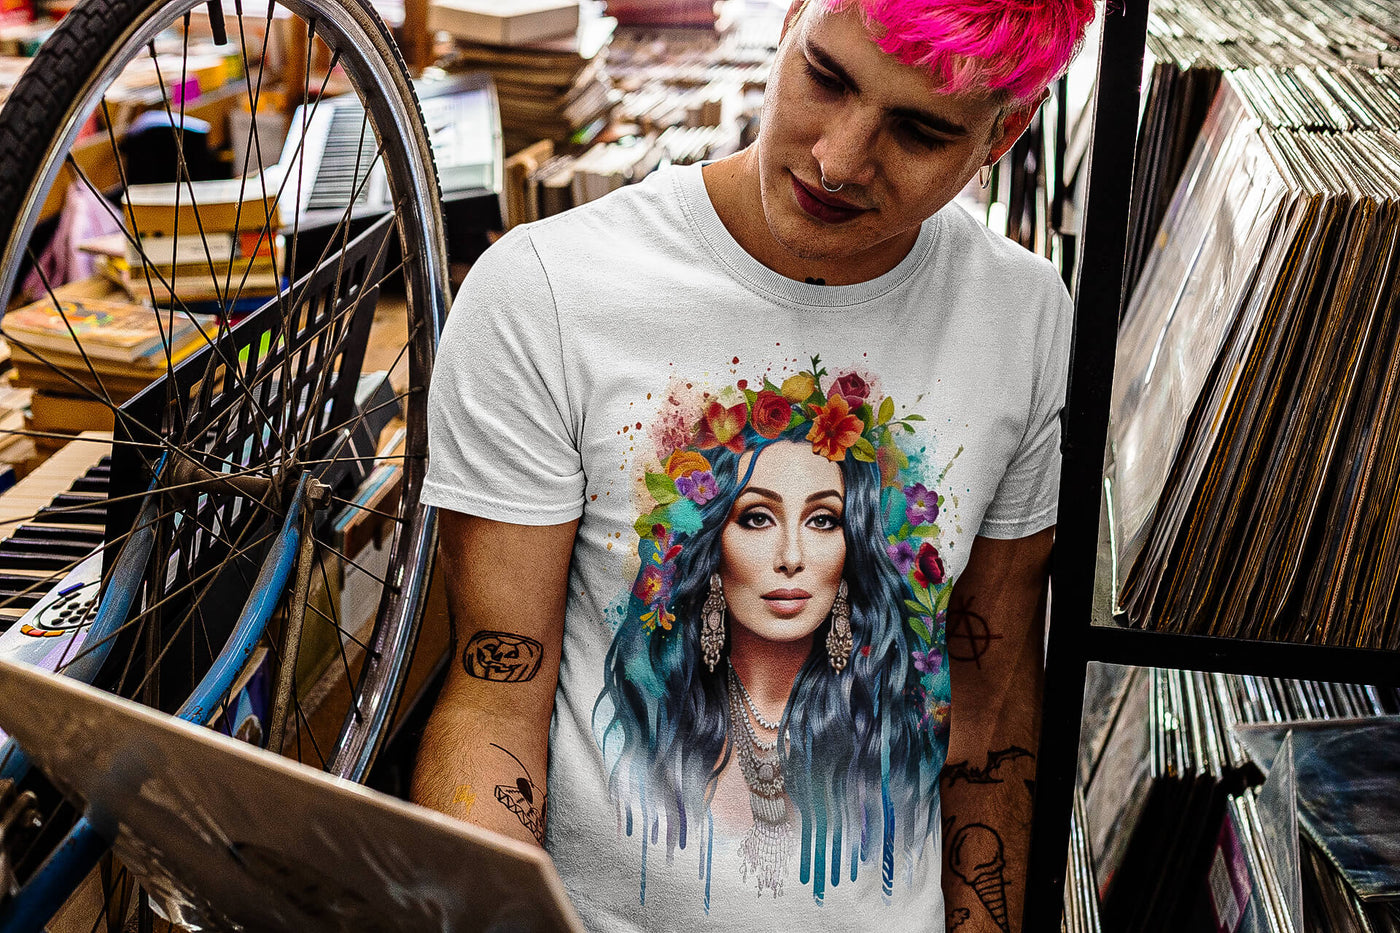 Tattooed young man at a vinyl record store, wearing Gllamazon's Cher-ry Blossom Cher T-shirt. Color: White.